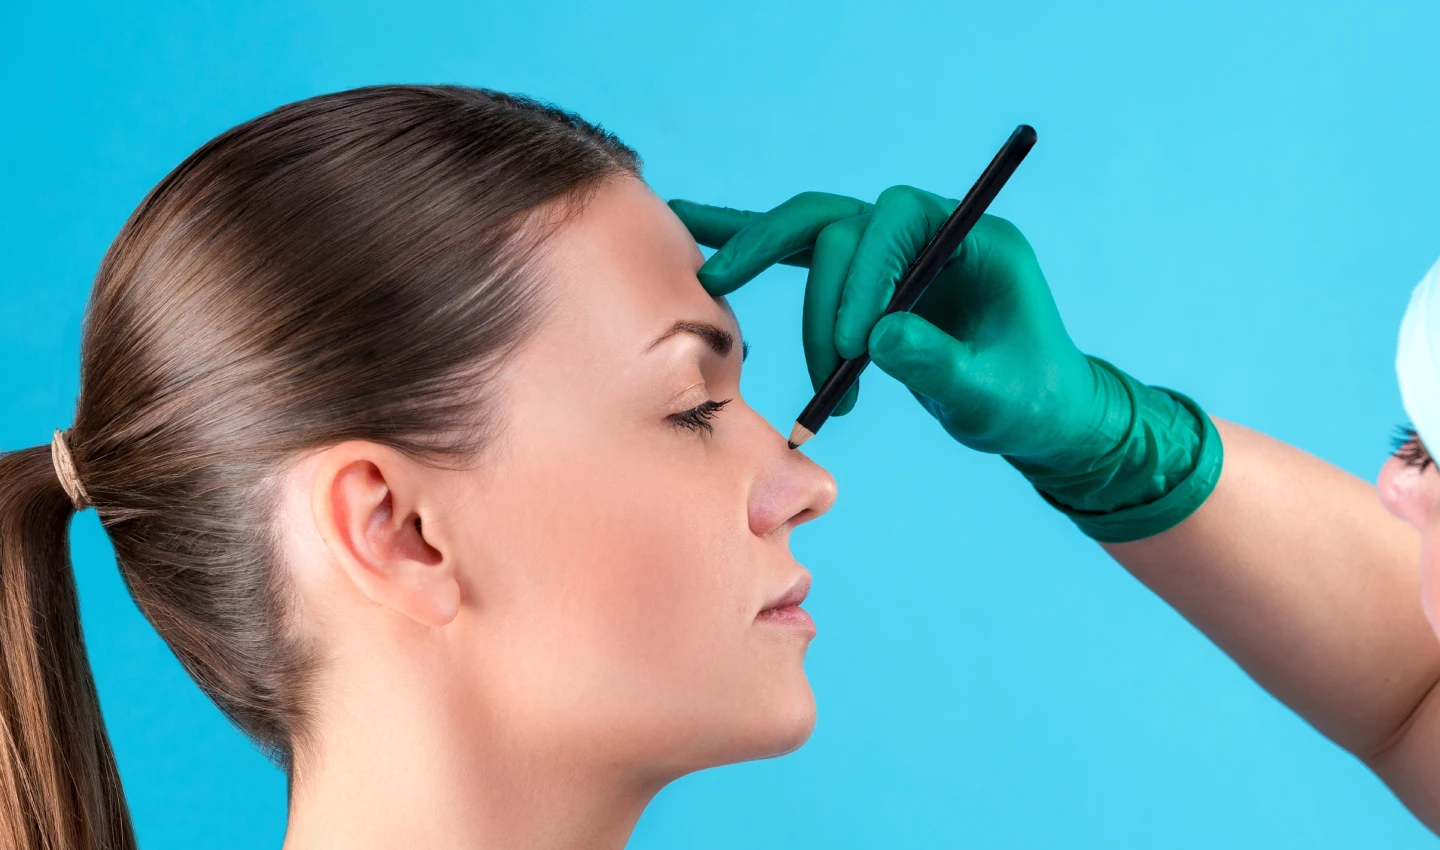 A woman having her nose marked before a non-surgical nose job with dermal fillers.